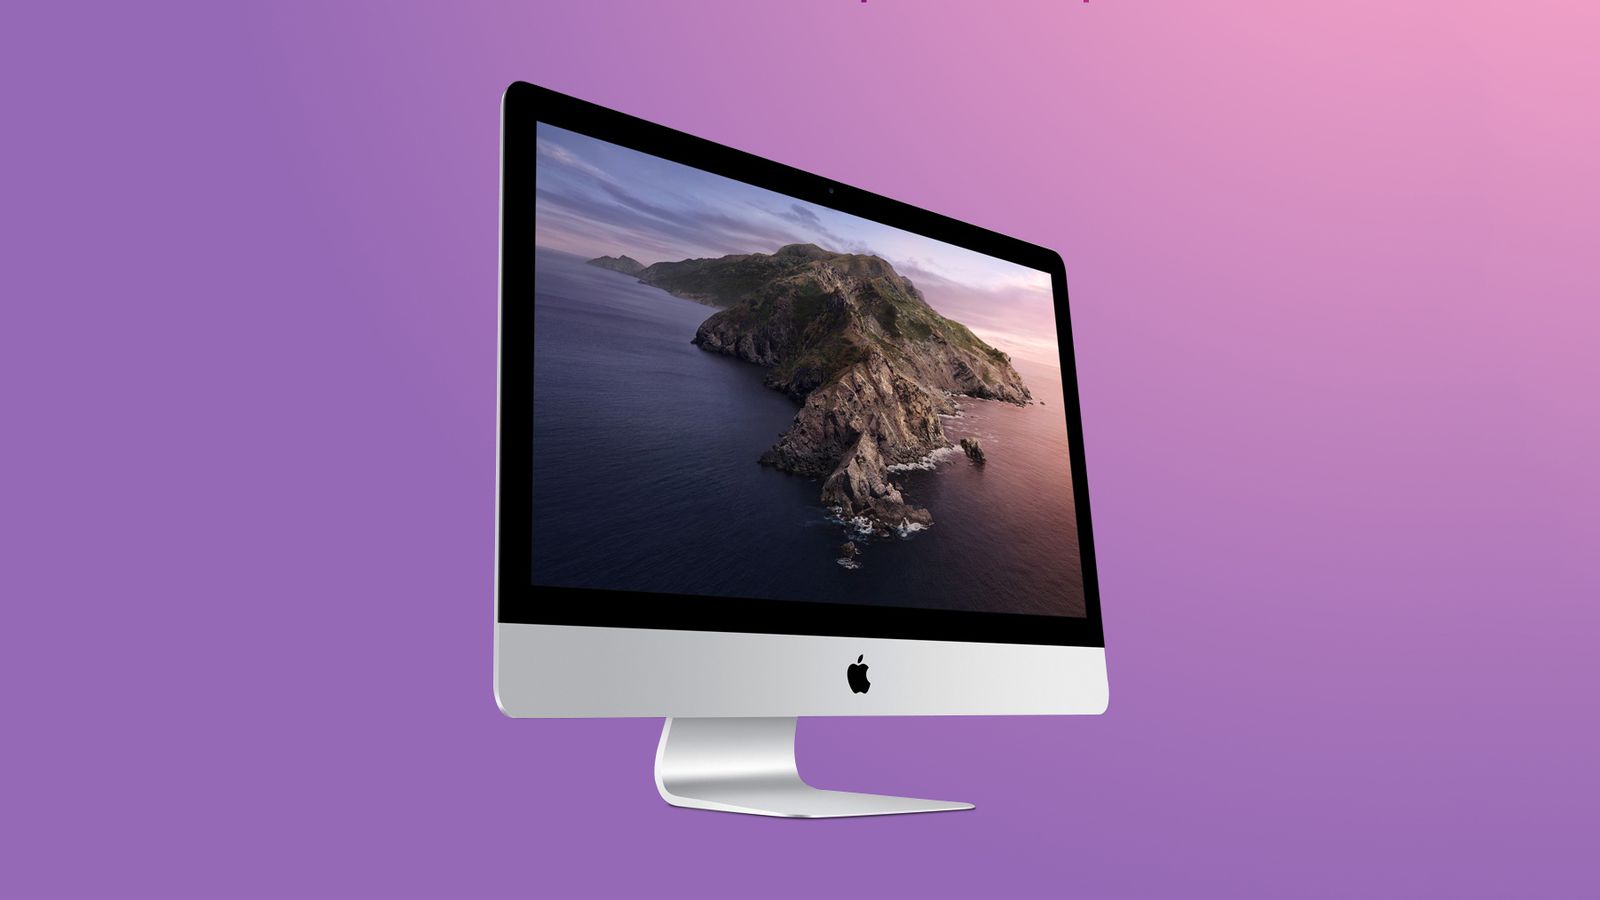 Apple Announces New 27-Inch iMac With 10th-Gen Processors, Up to